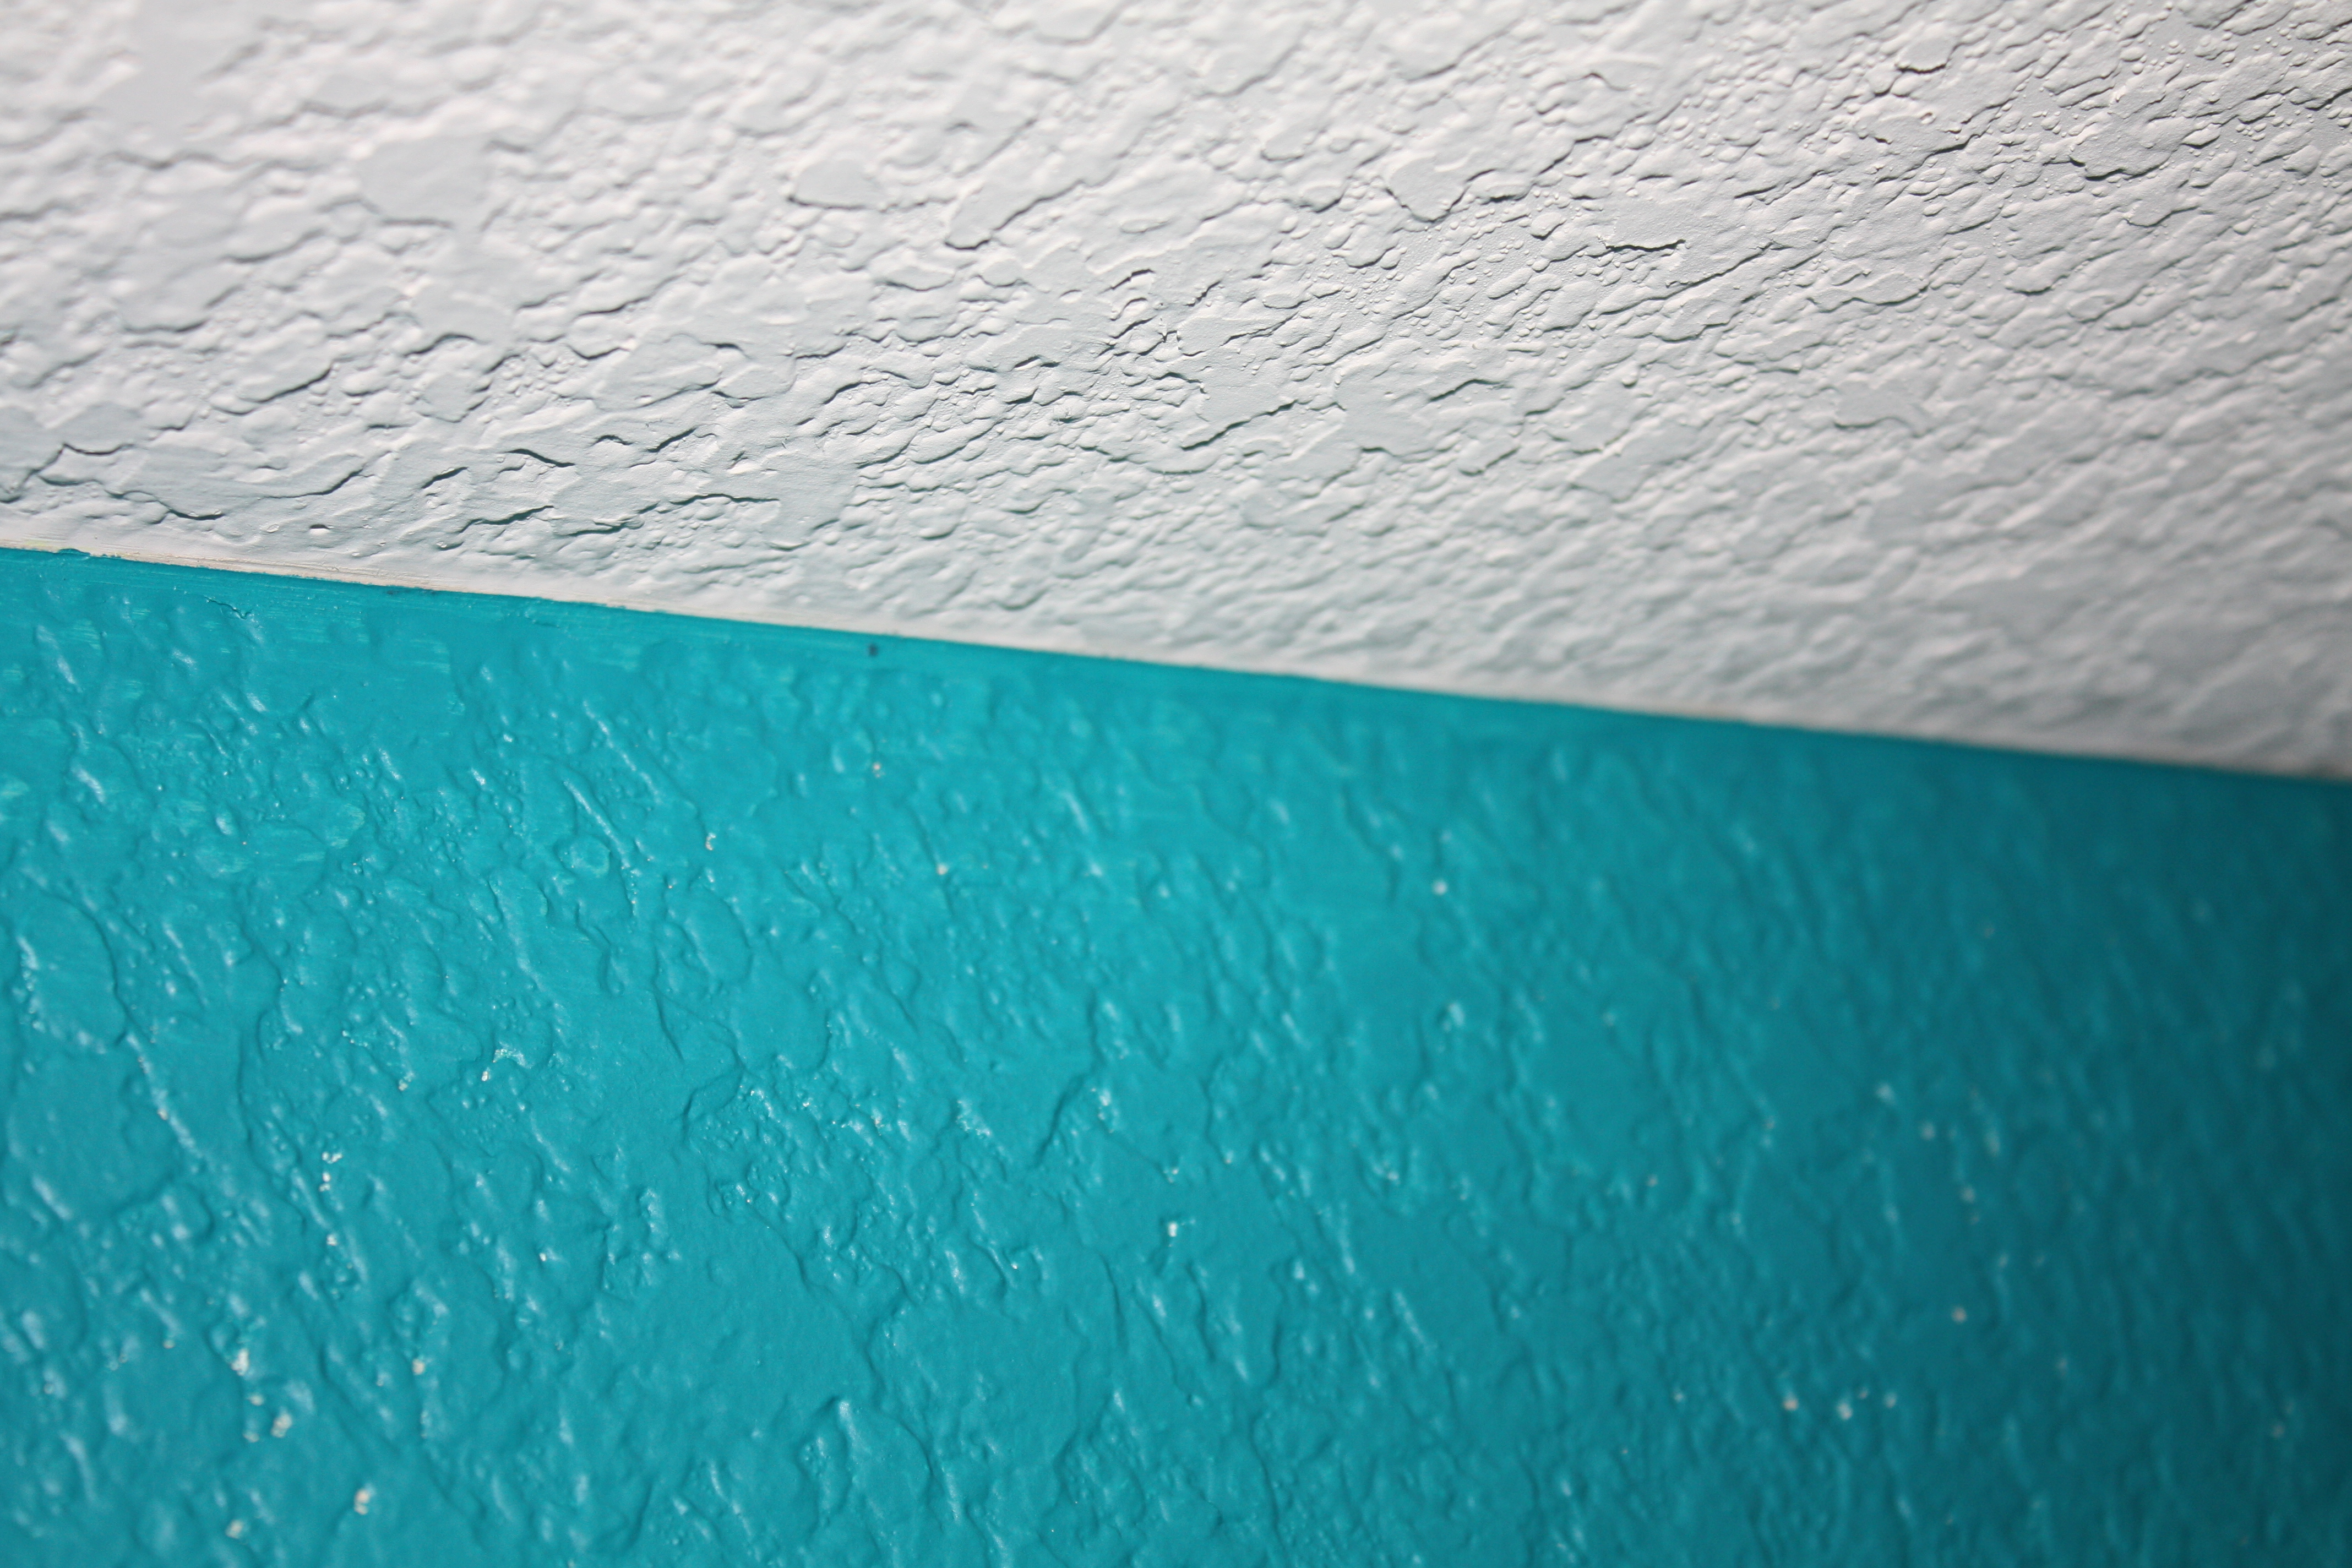 Dadvice: Painting Textured Walls | The EveryDad